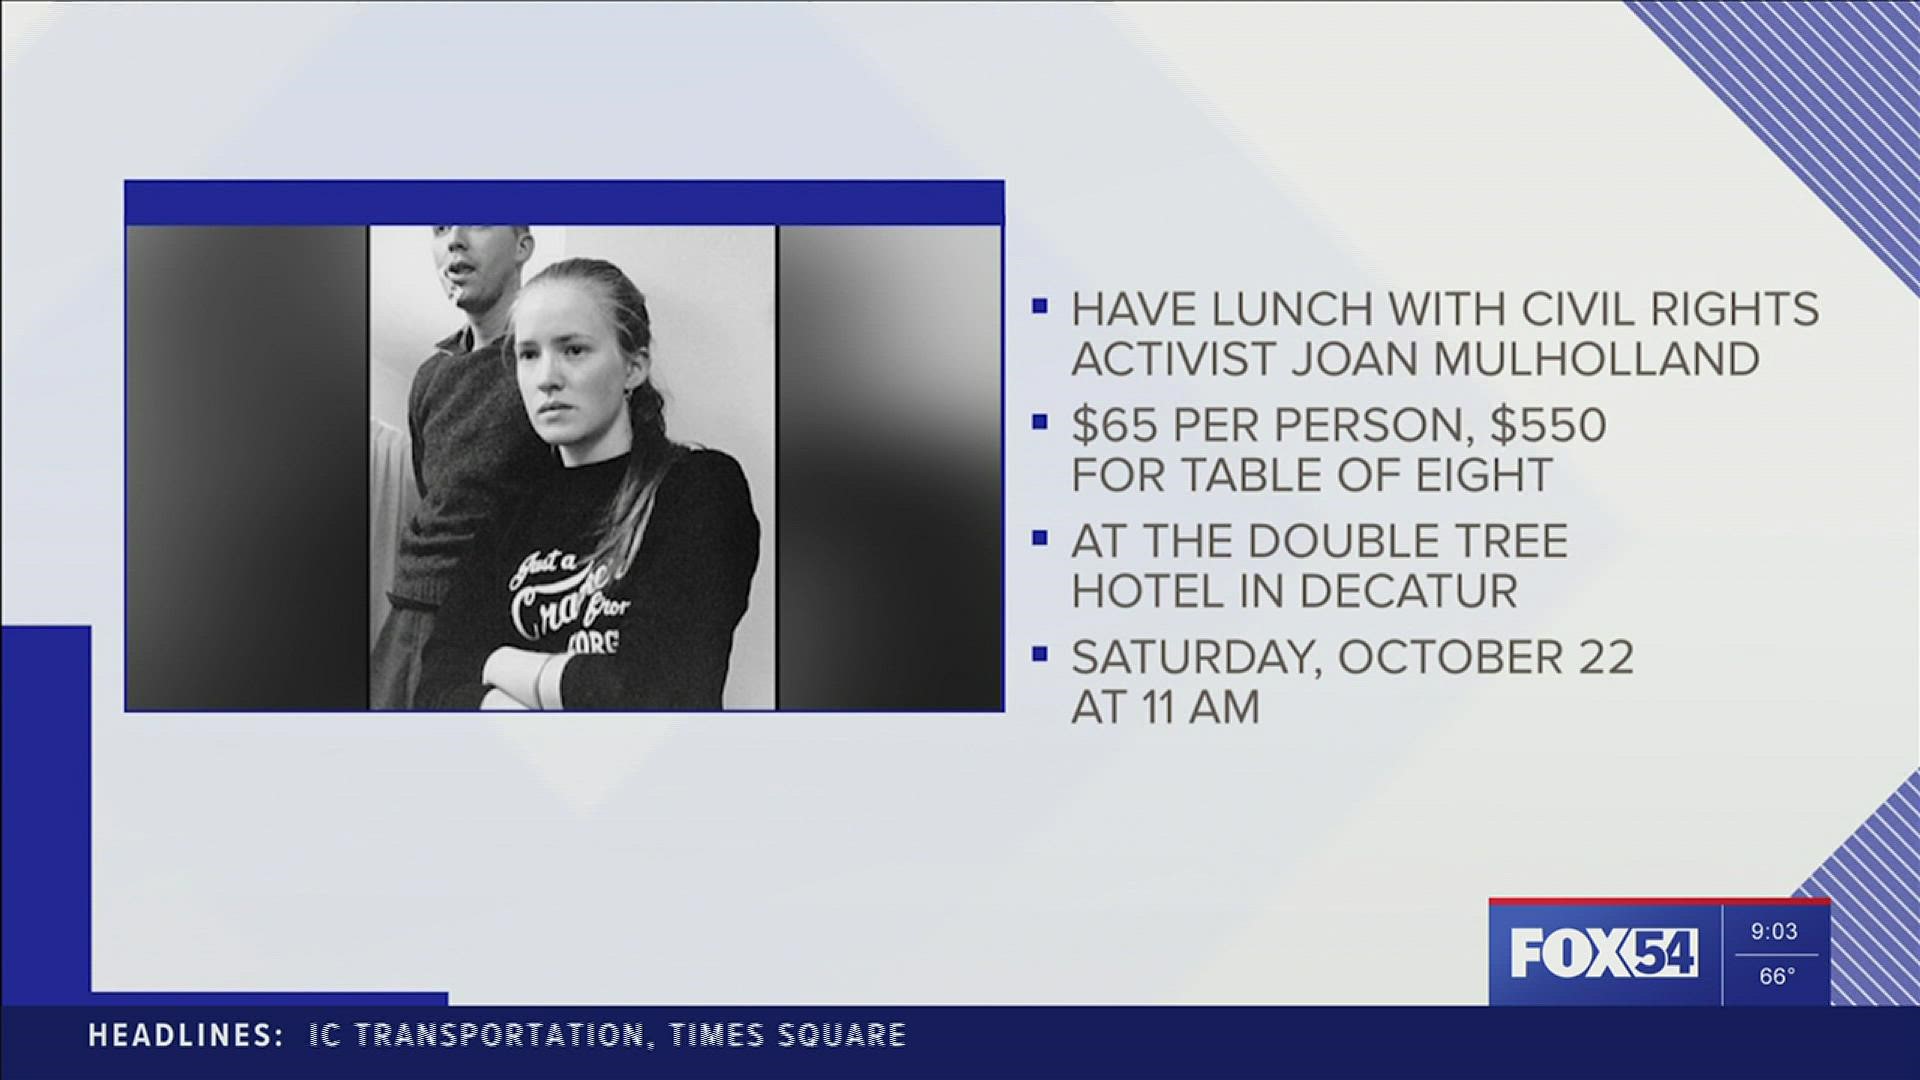 Civil Rights Activist Joan Trumpauer Mulholland will be the guest speaker at the Central North Alabama Alumnae chapter of Delta Sigma Theta Sorority, Incorporated.